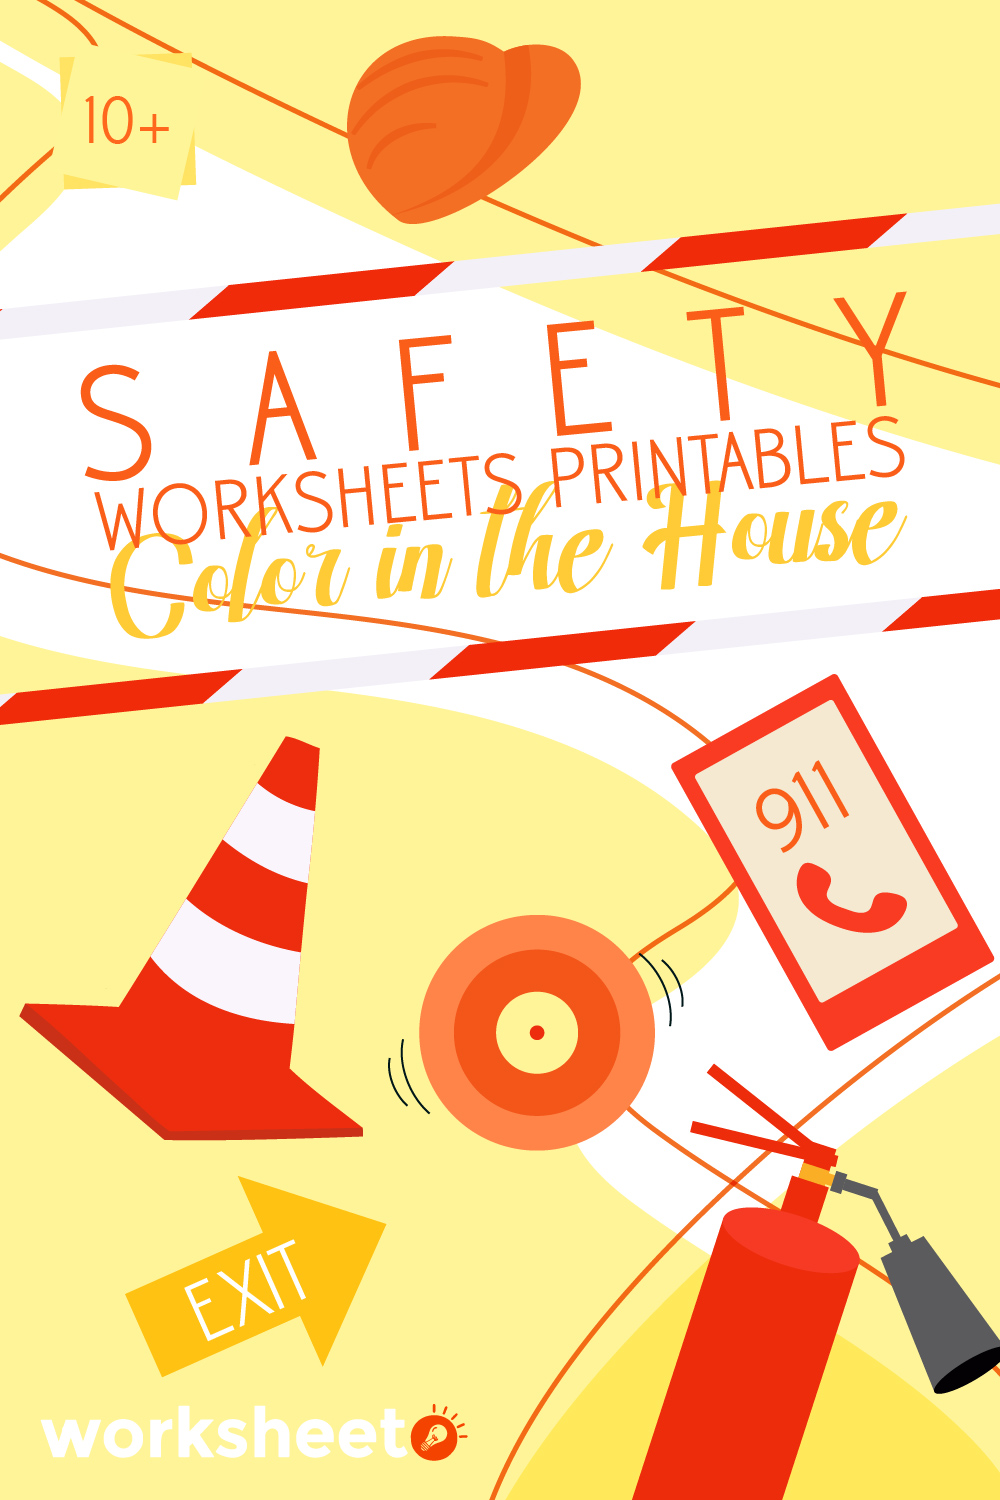 Safety Worksheets Printables Color in the House